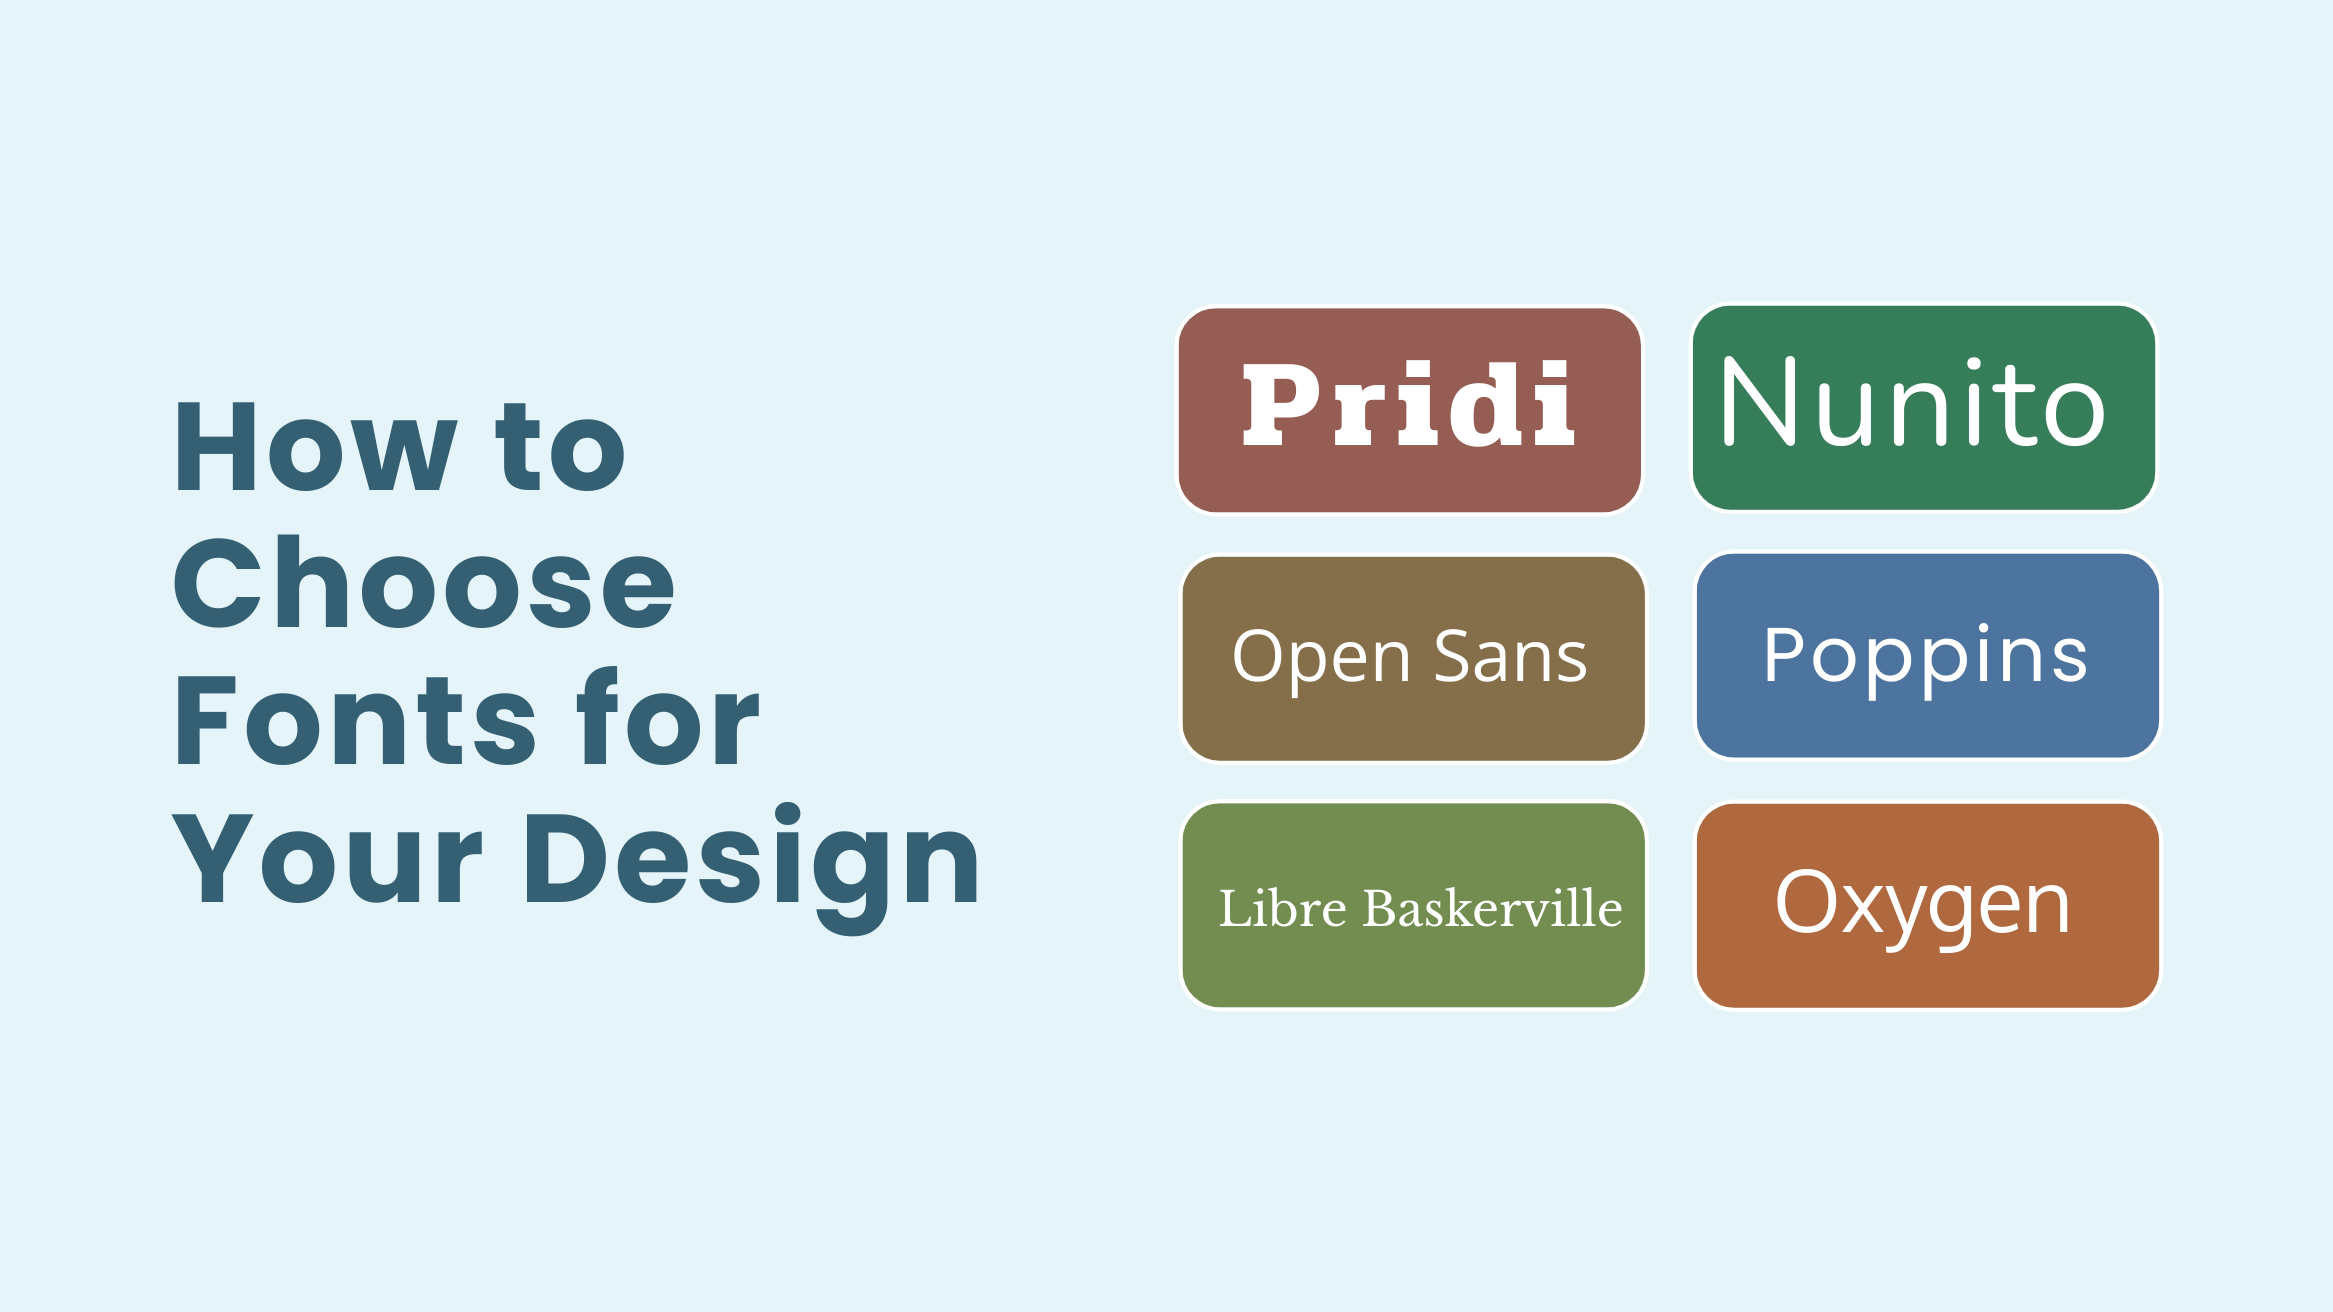 How to Choose Fonts for Your Design